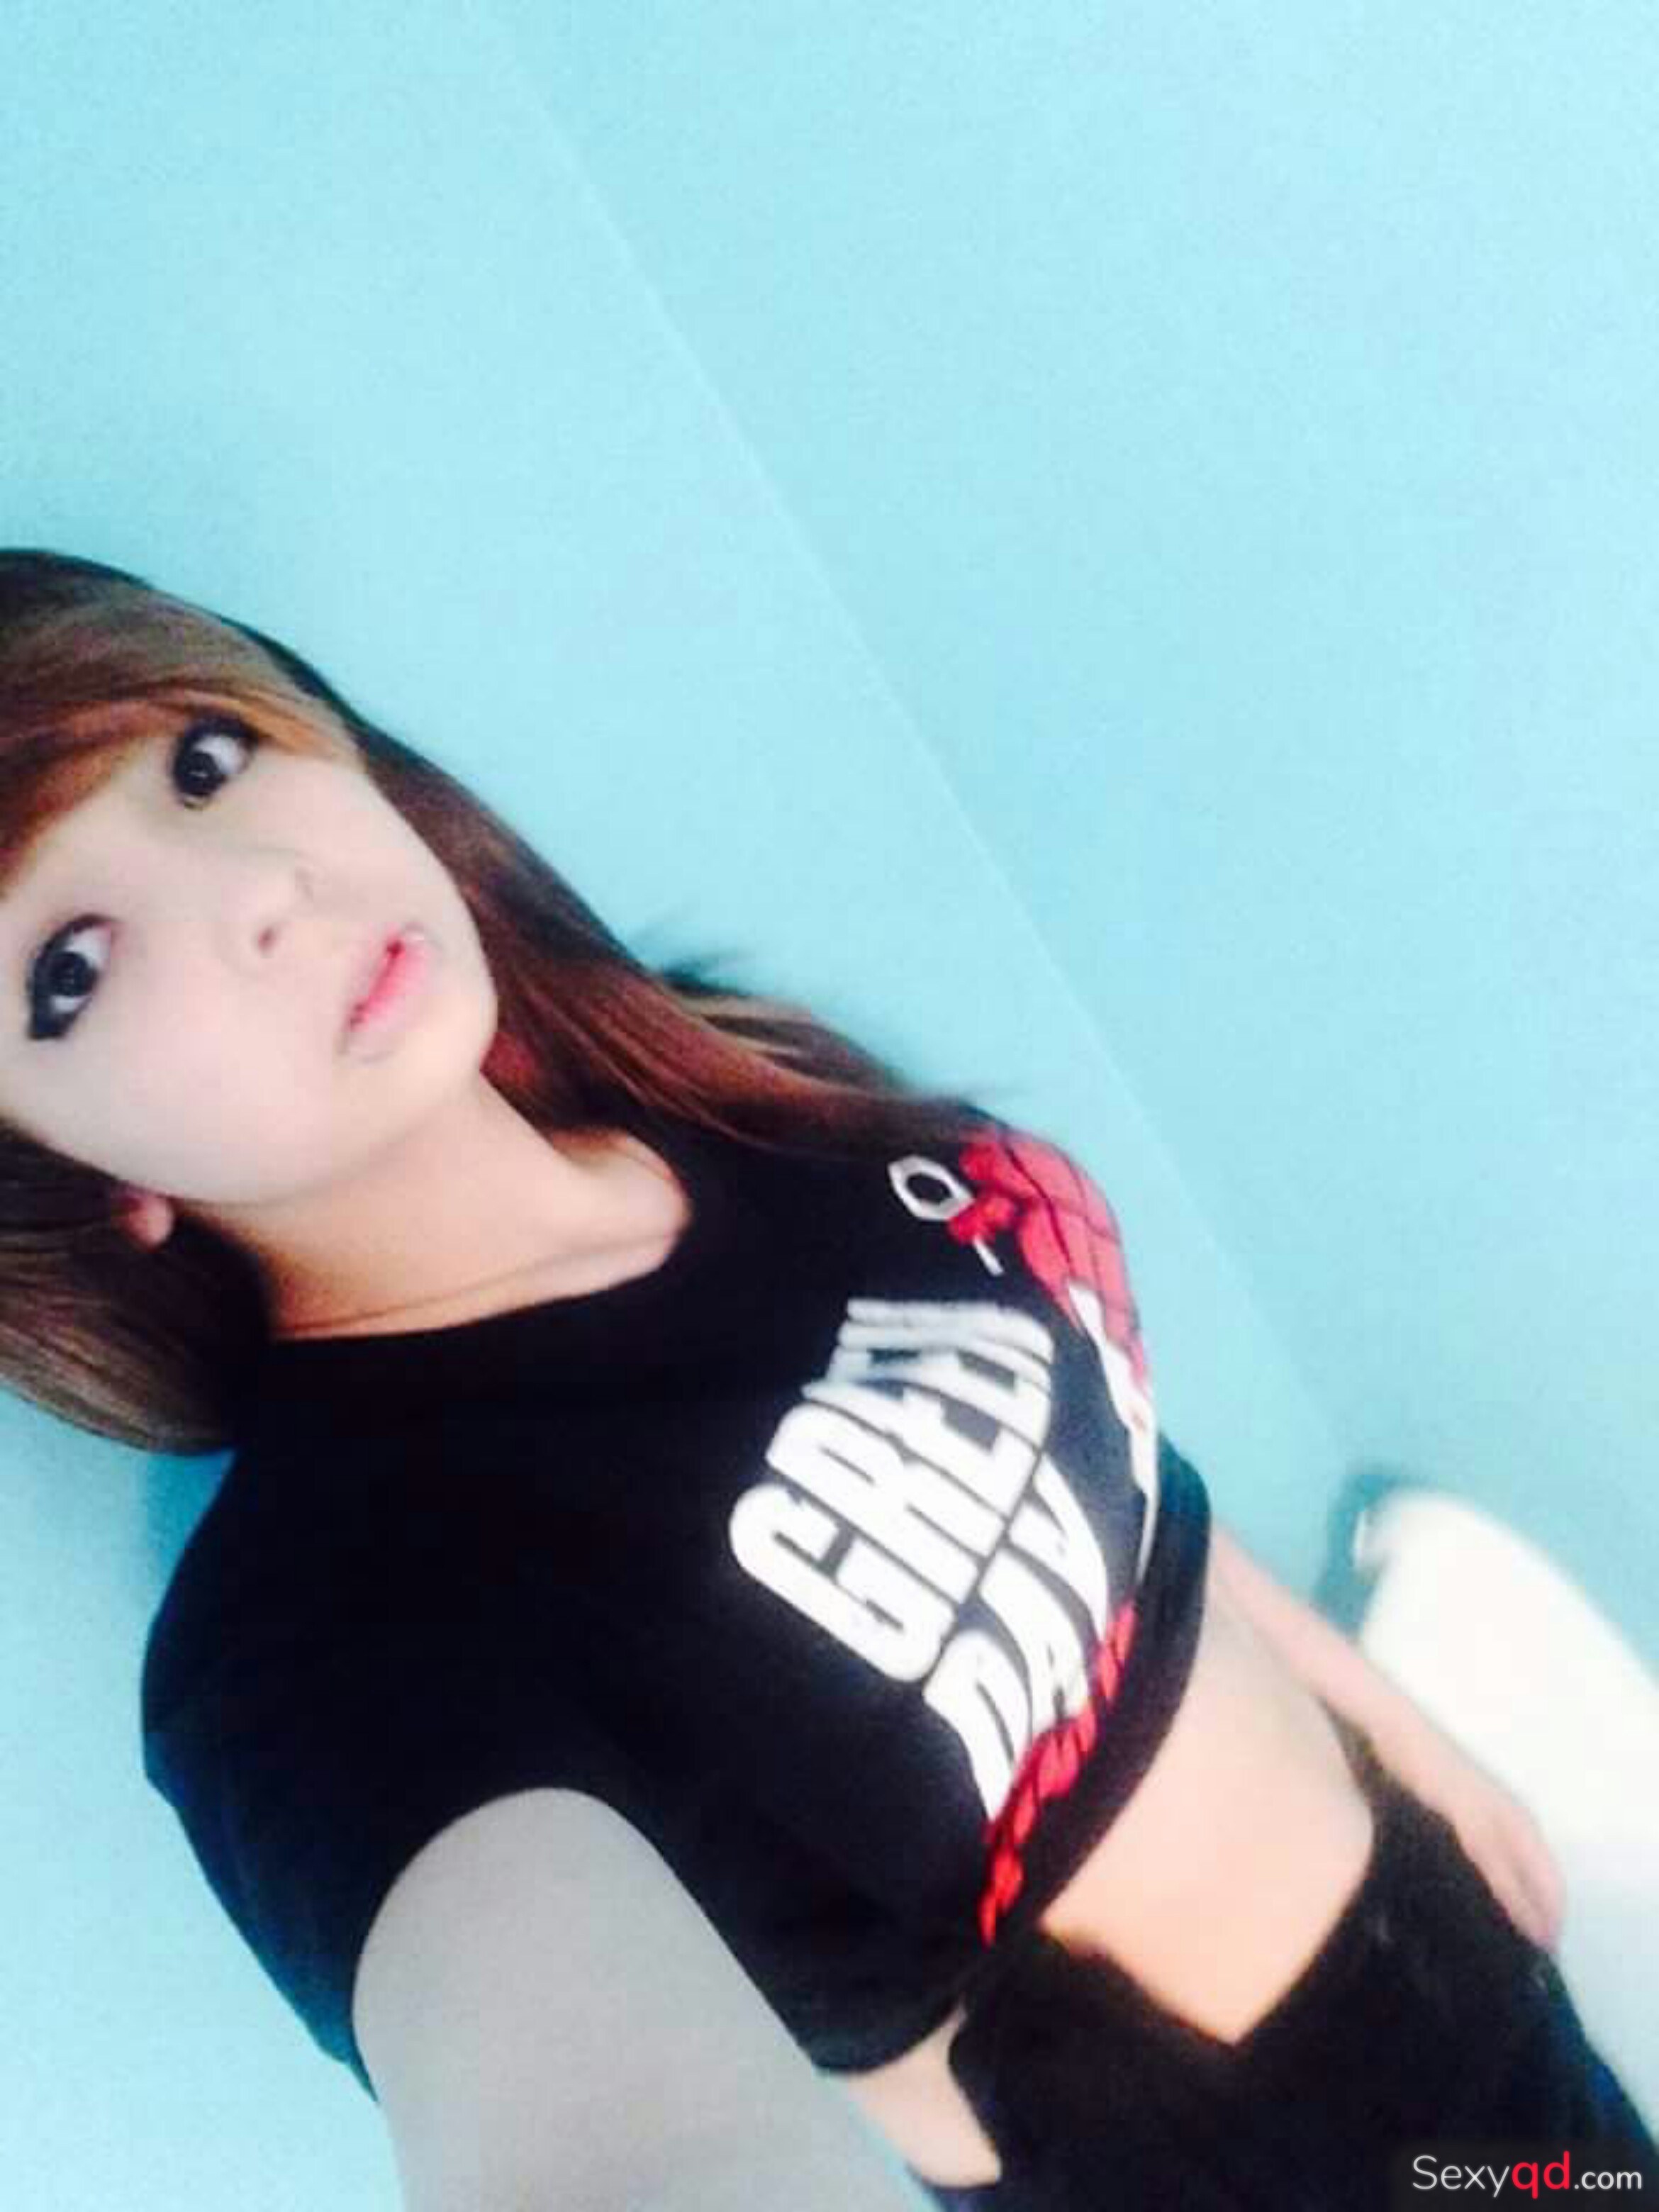 Emo Teens Get Naked - asian emo pussy super cute emo teen girl posing on nude selfies sexyqd -  XXXPicz